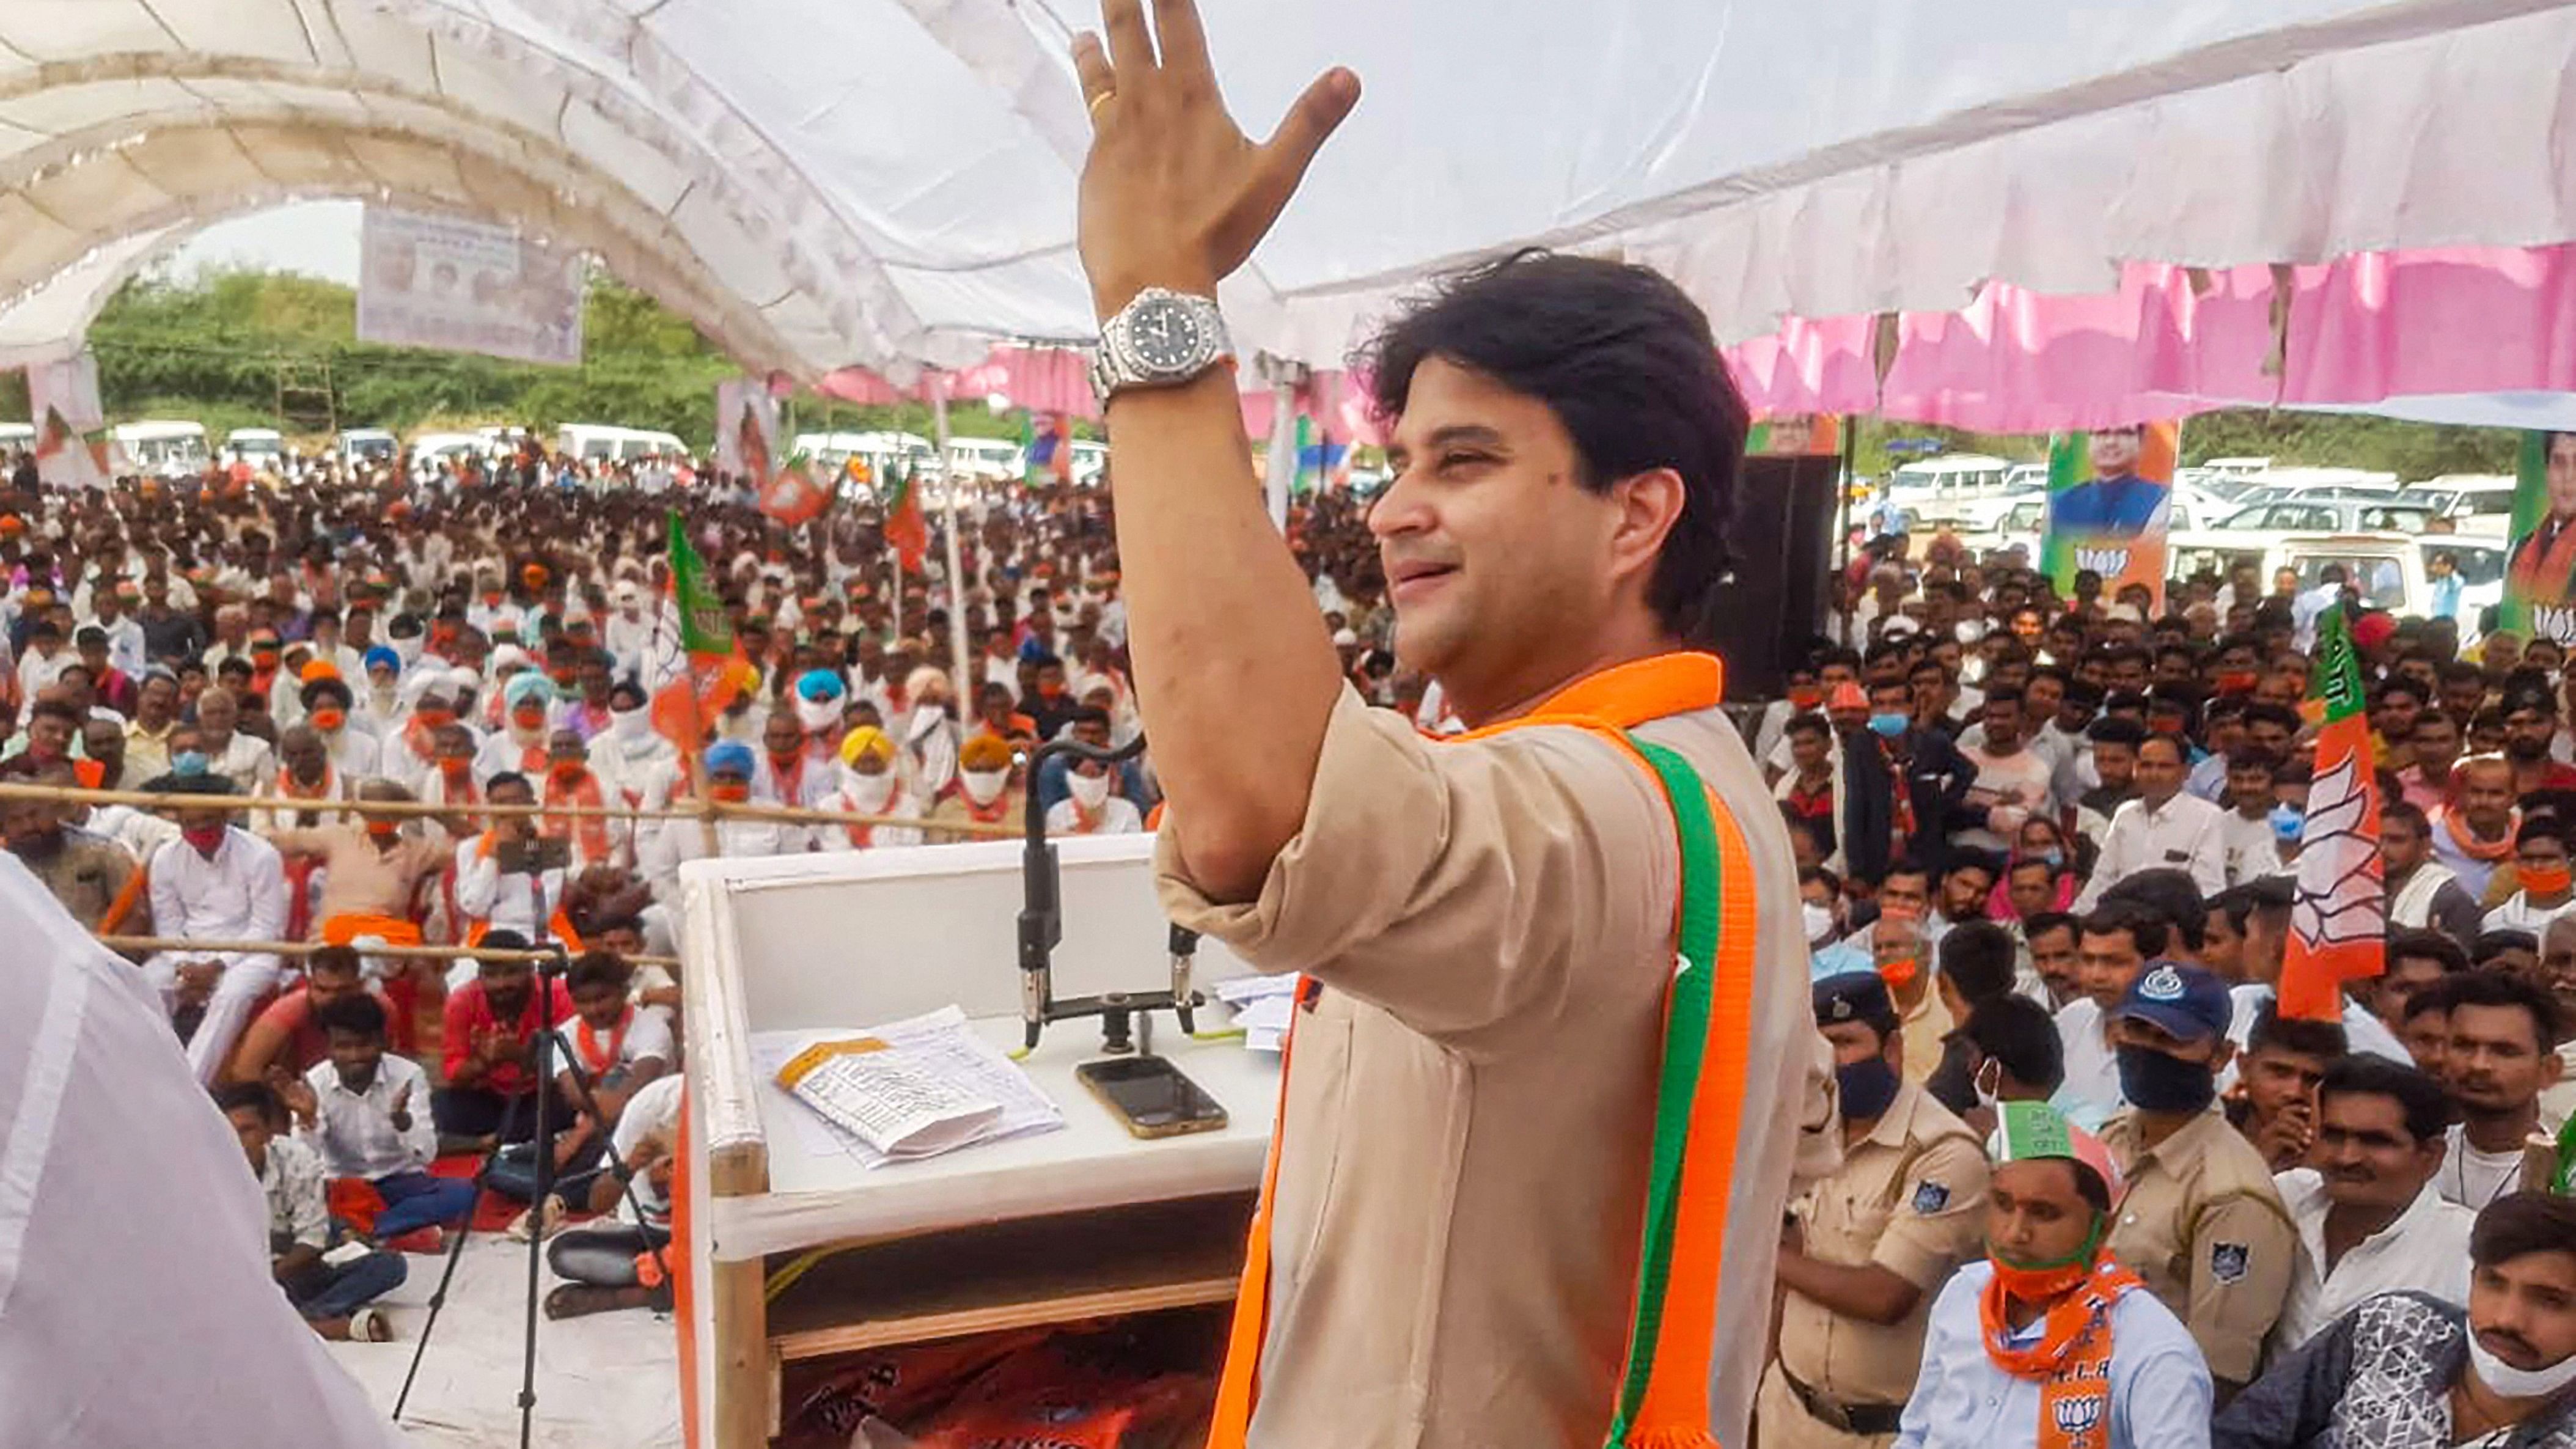 <div class="paragraphs"><p>BJP leader Jyotiraditya Scindia addresses an election rally in support of a party candidate. </p></div>